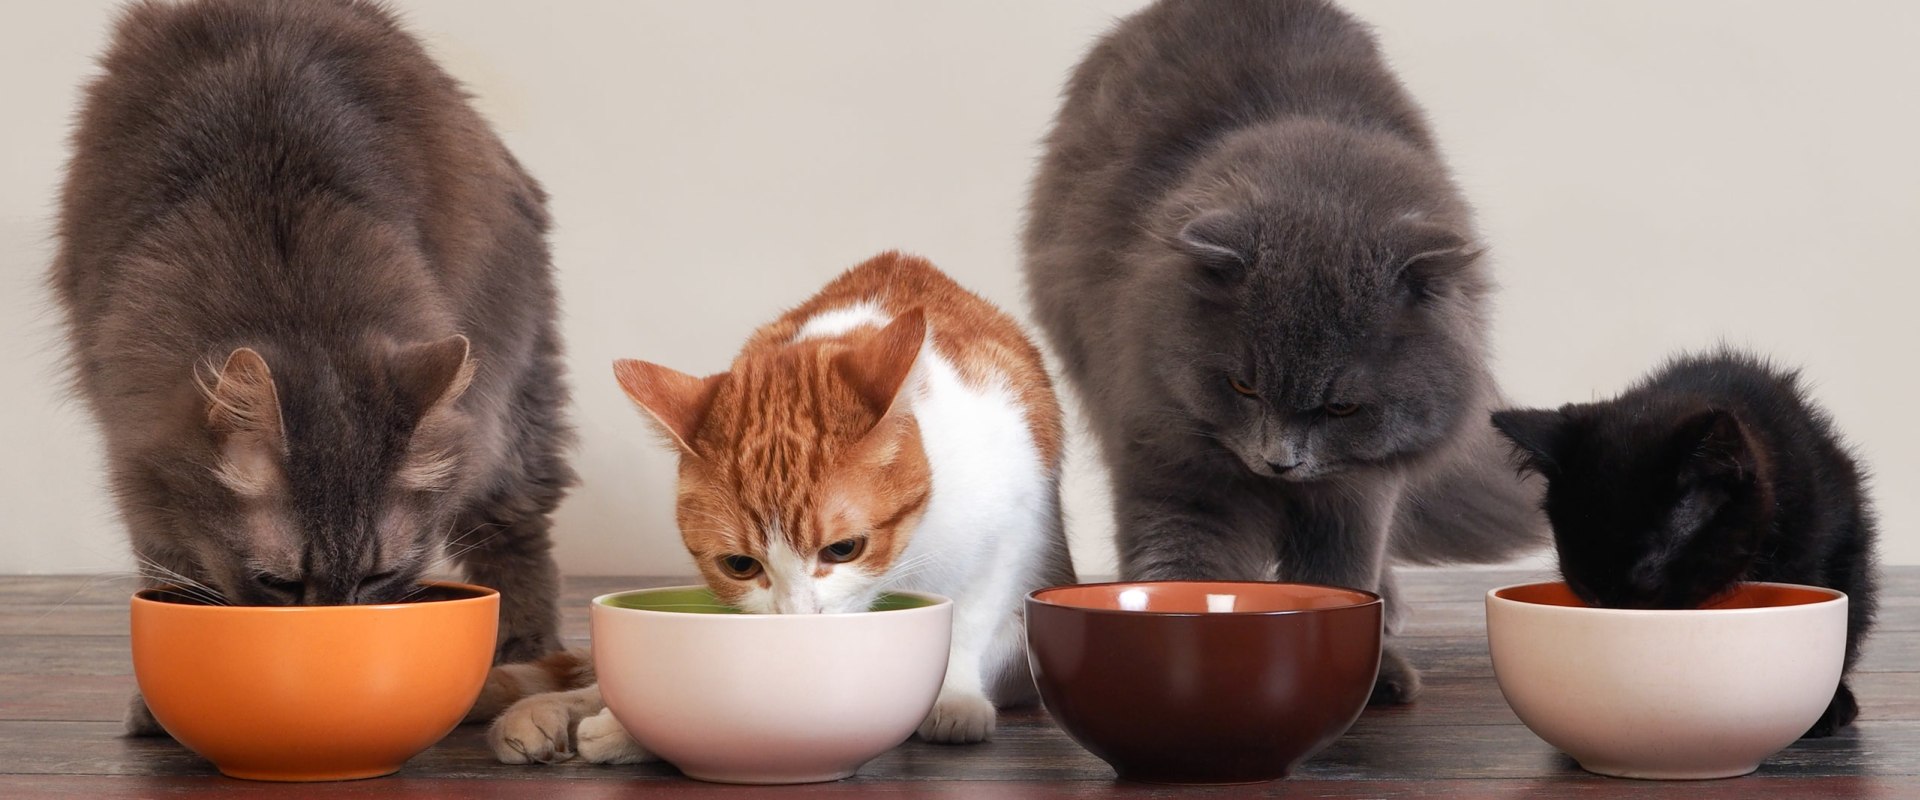 Monitoring your Cat's Protein, Fat, Carbohydrates, Vitamins, and Minerals in Their Diet